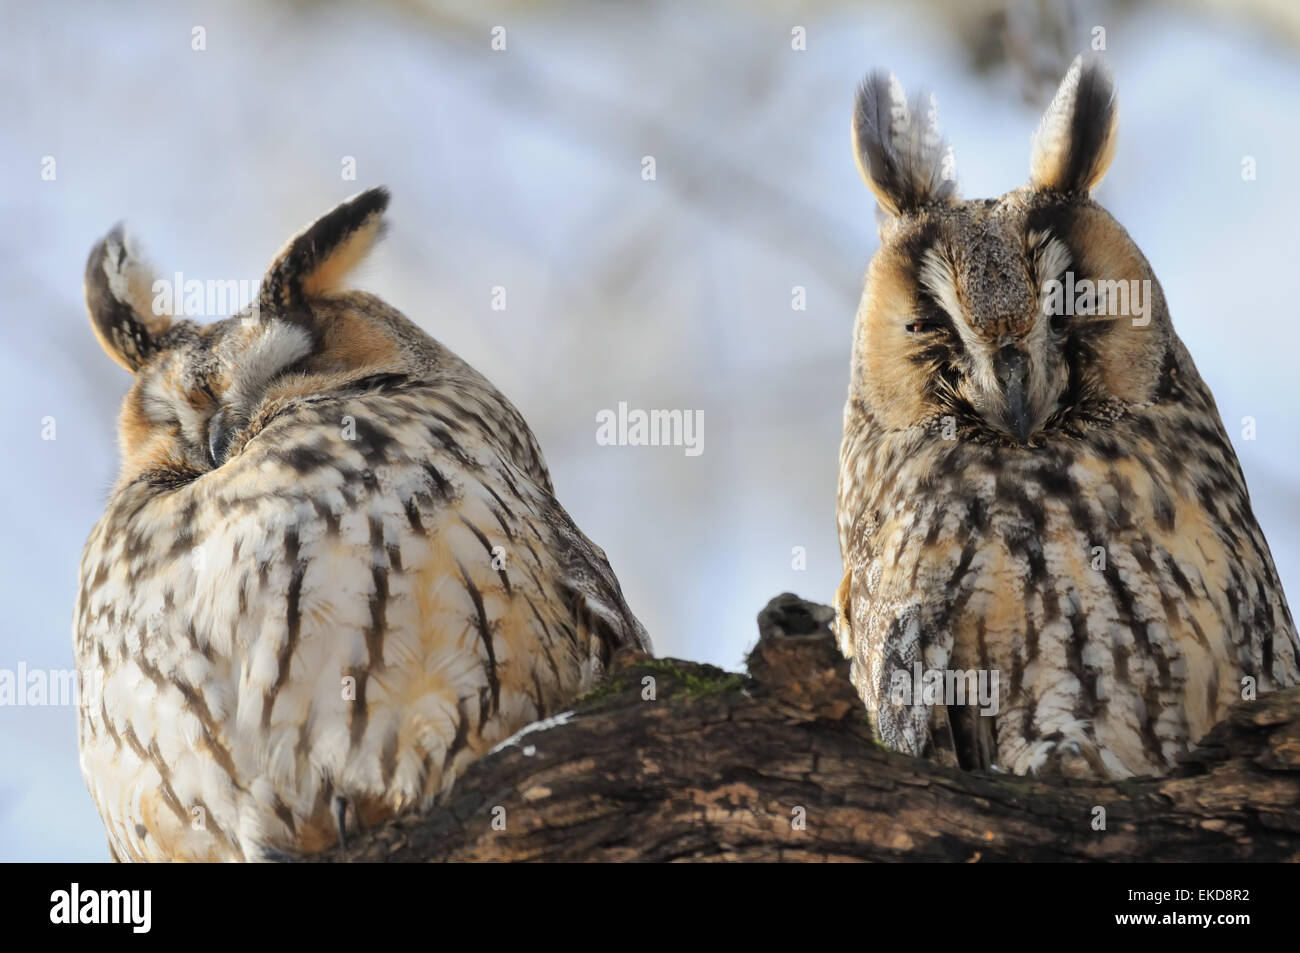 Two Long-eared Owls at the tree Stock Photo